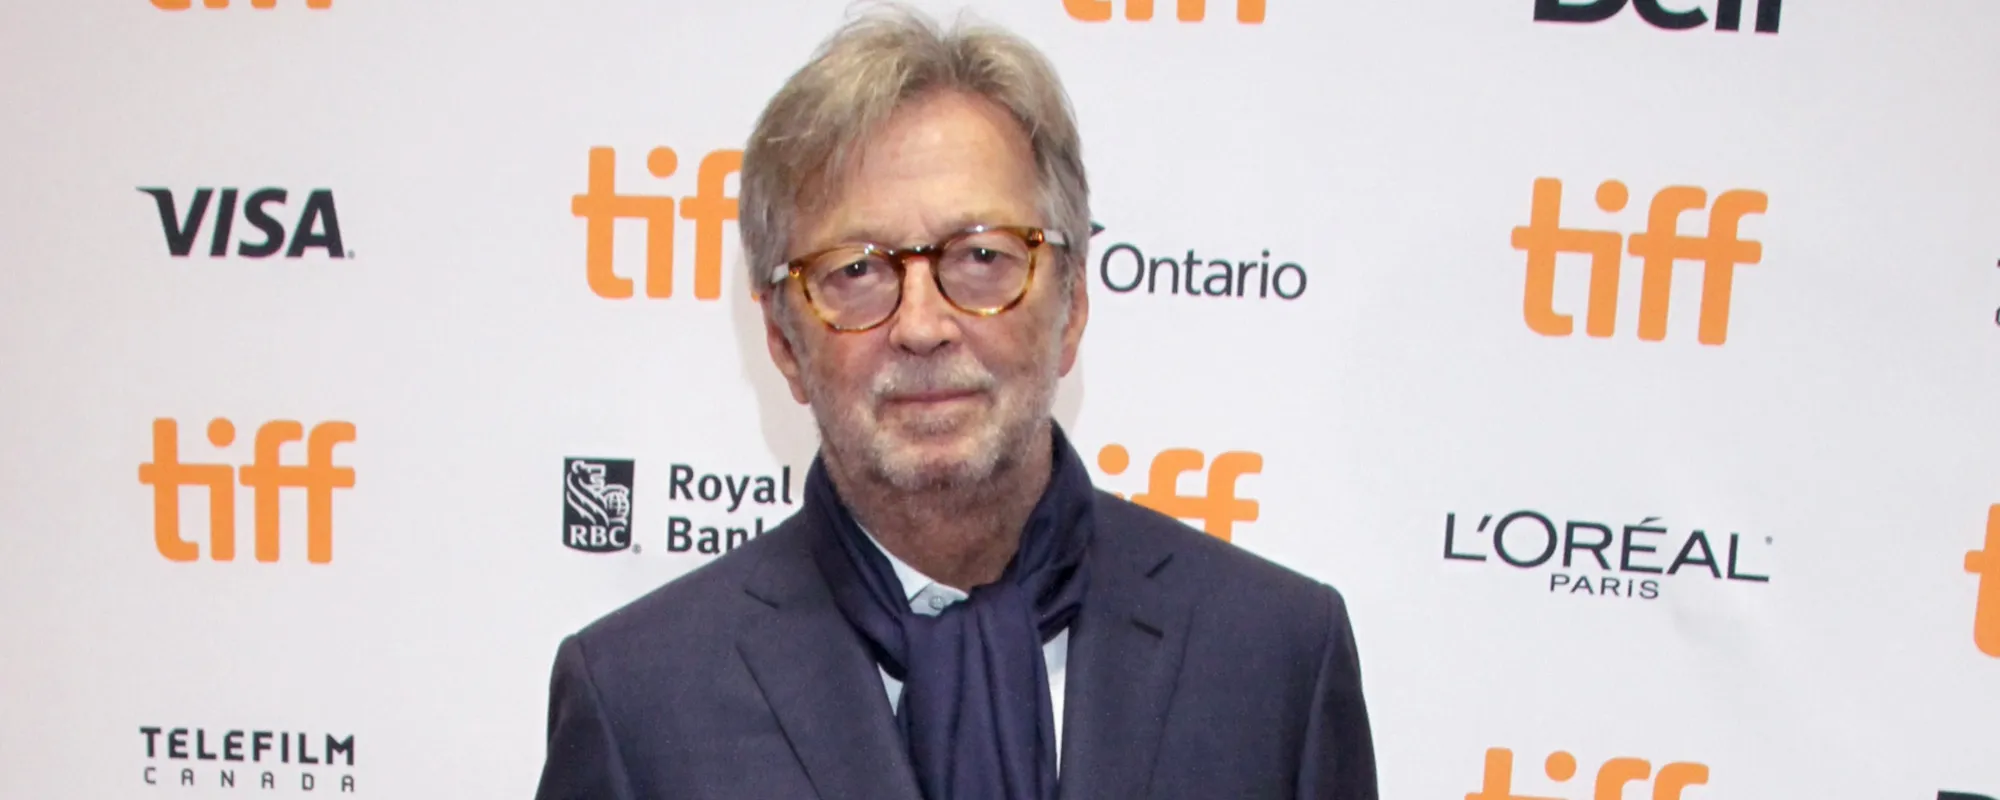 Eric Clapton’s Net Worth and Legacy: From “Cocaine” to “This Has Gotta Stop”